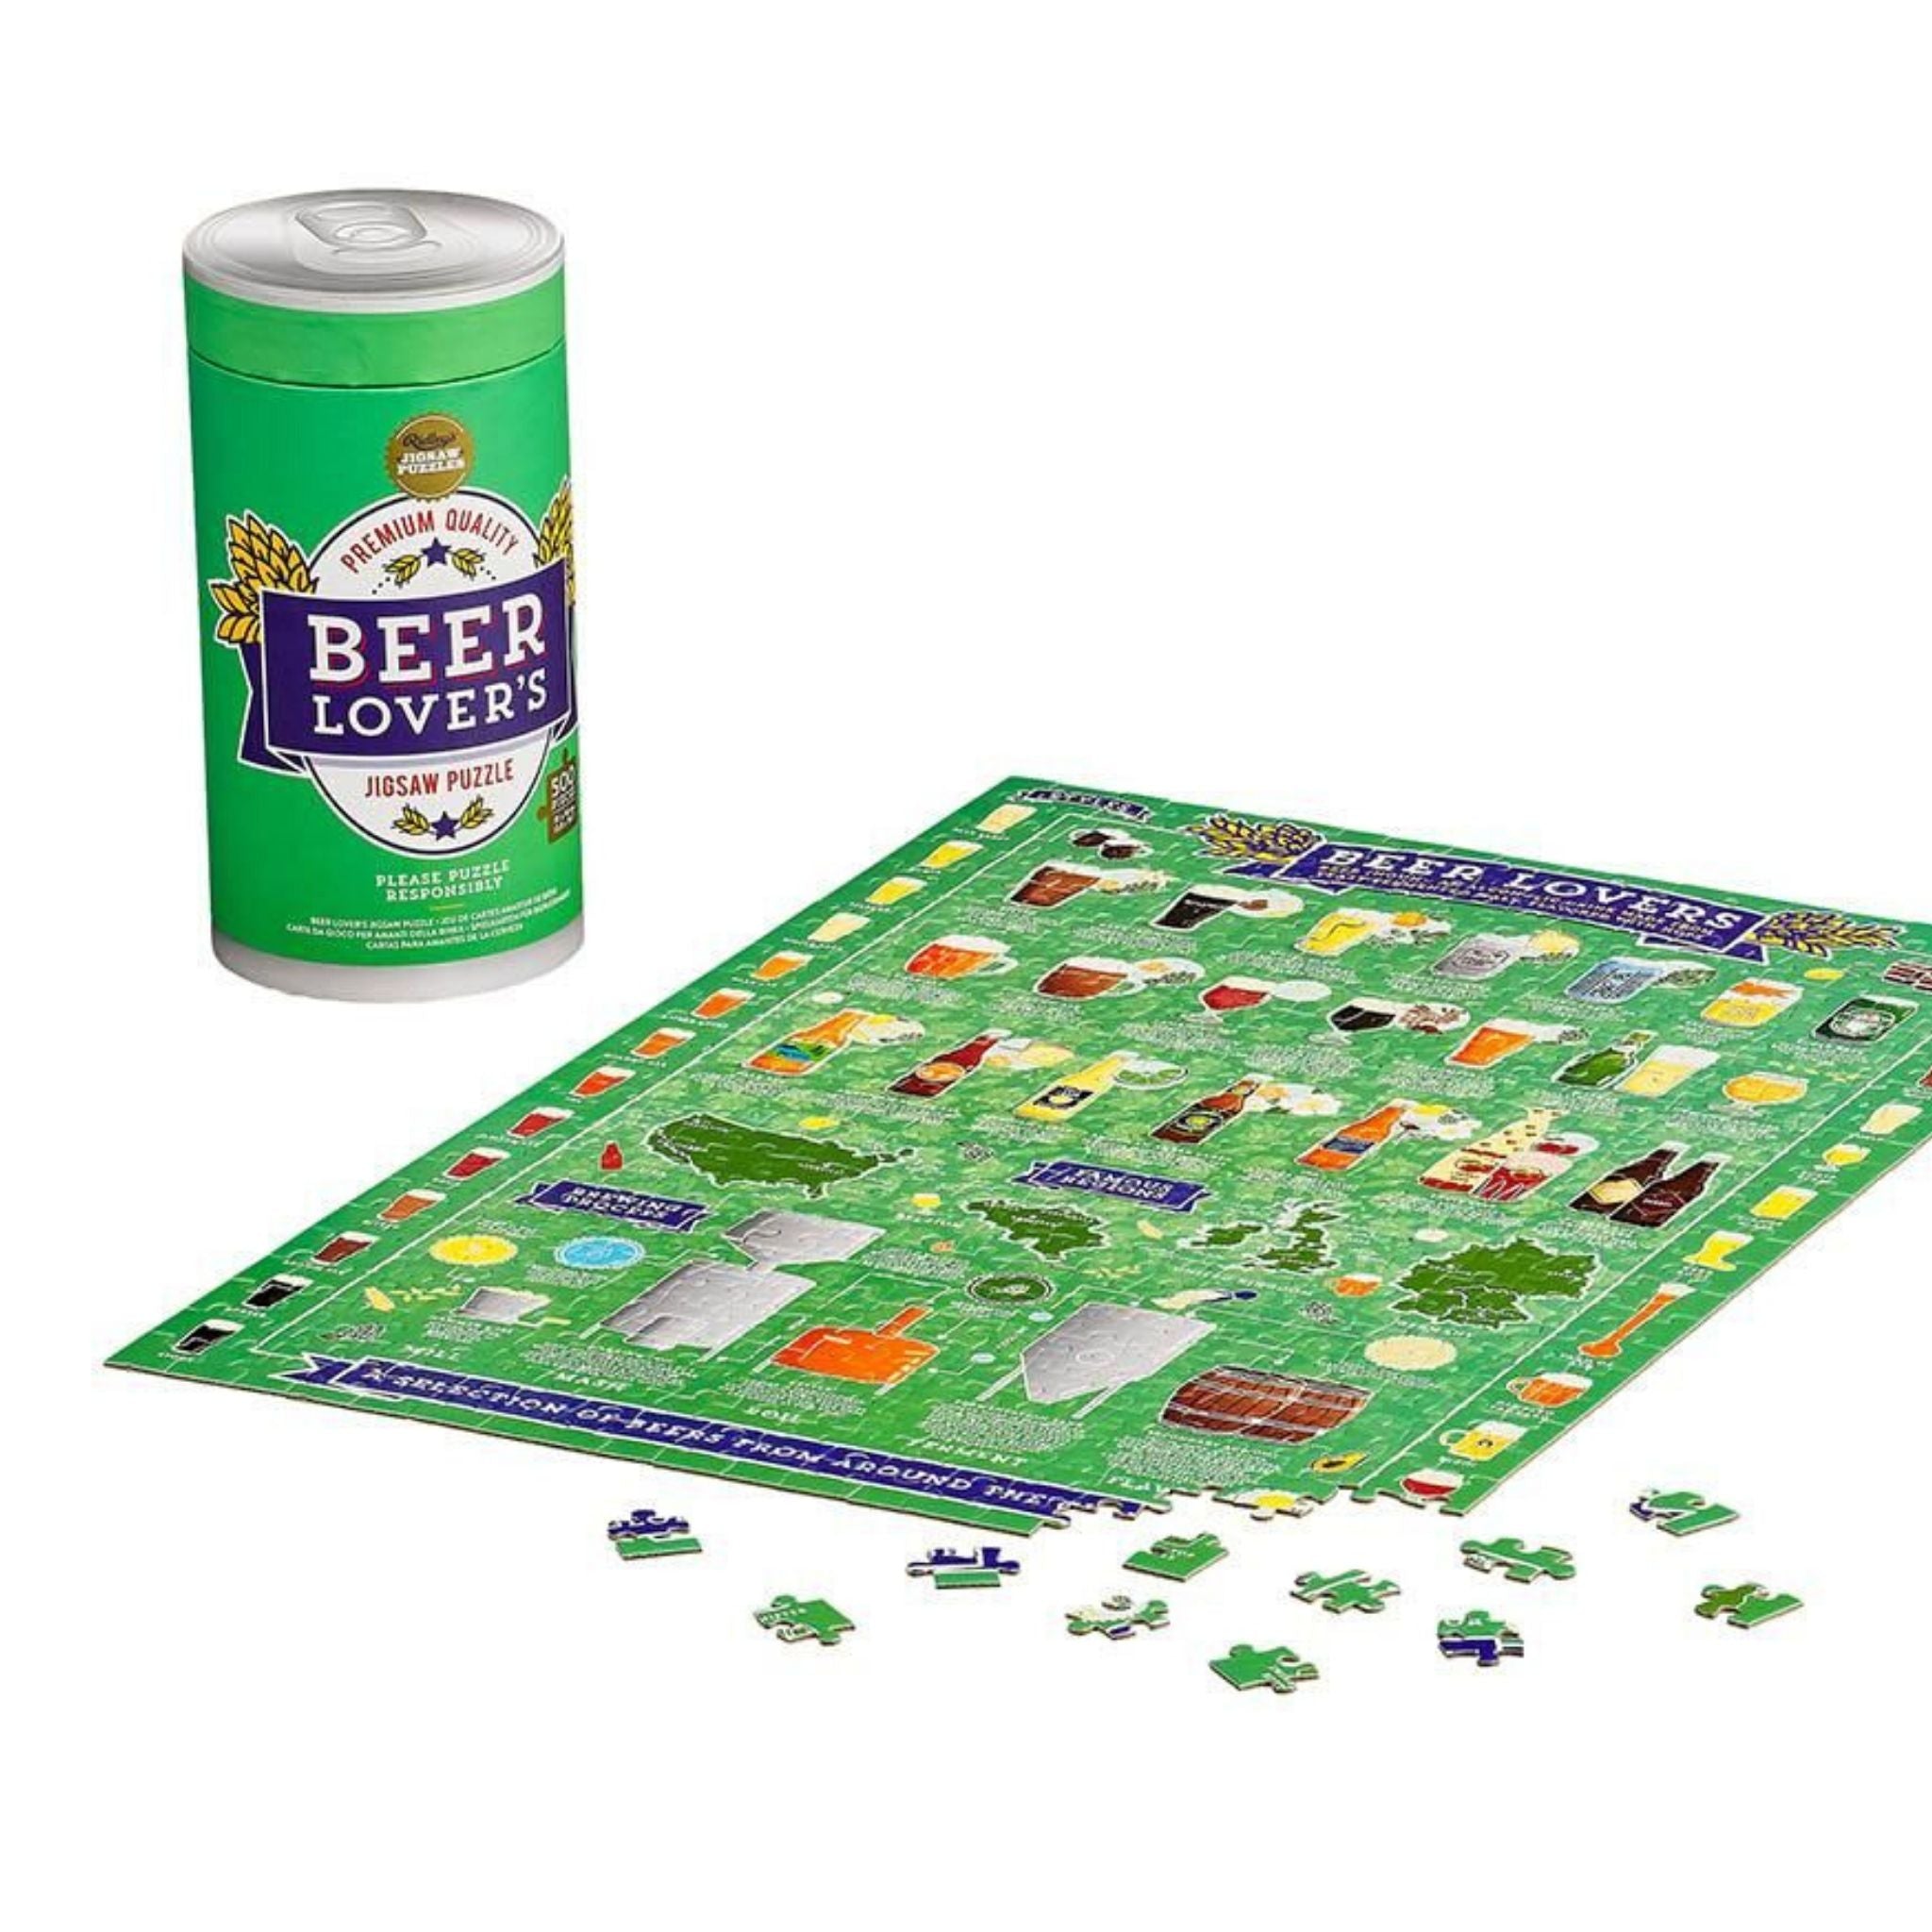 Ridley's Games Beer Lover's Jigsaw (500 pc)